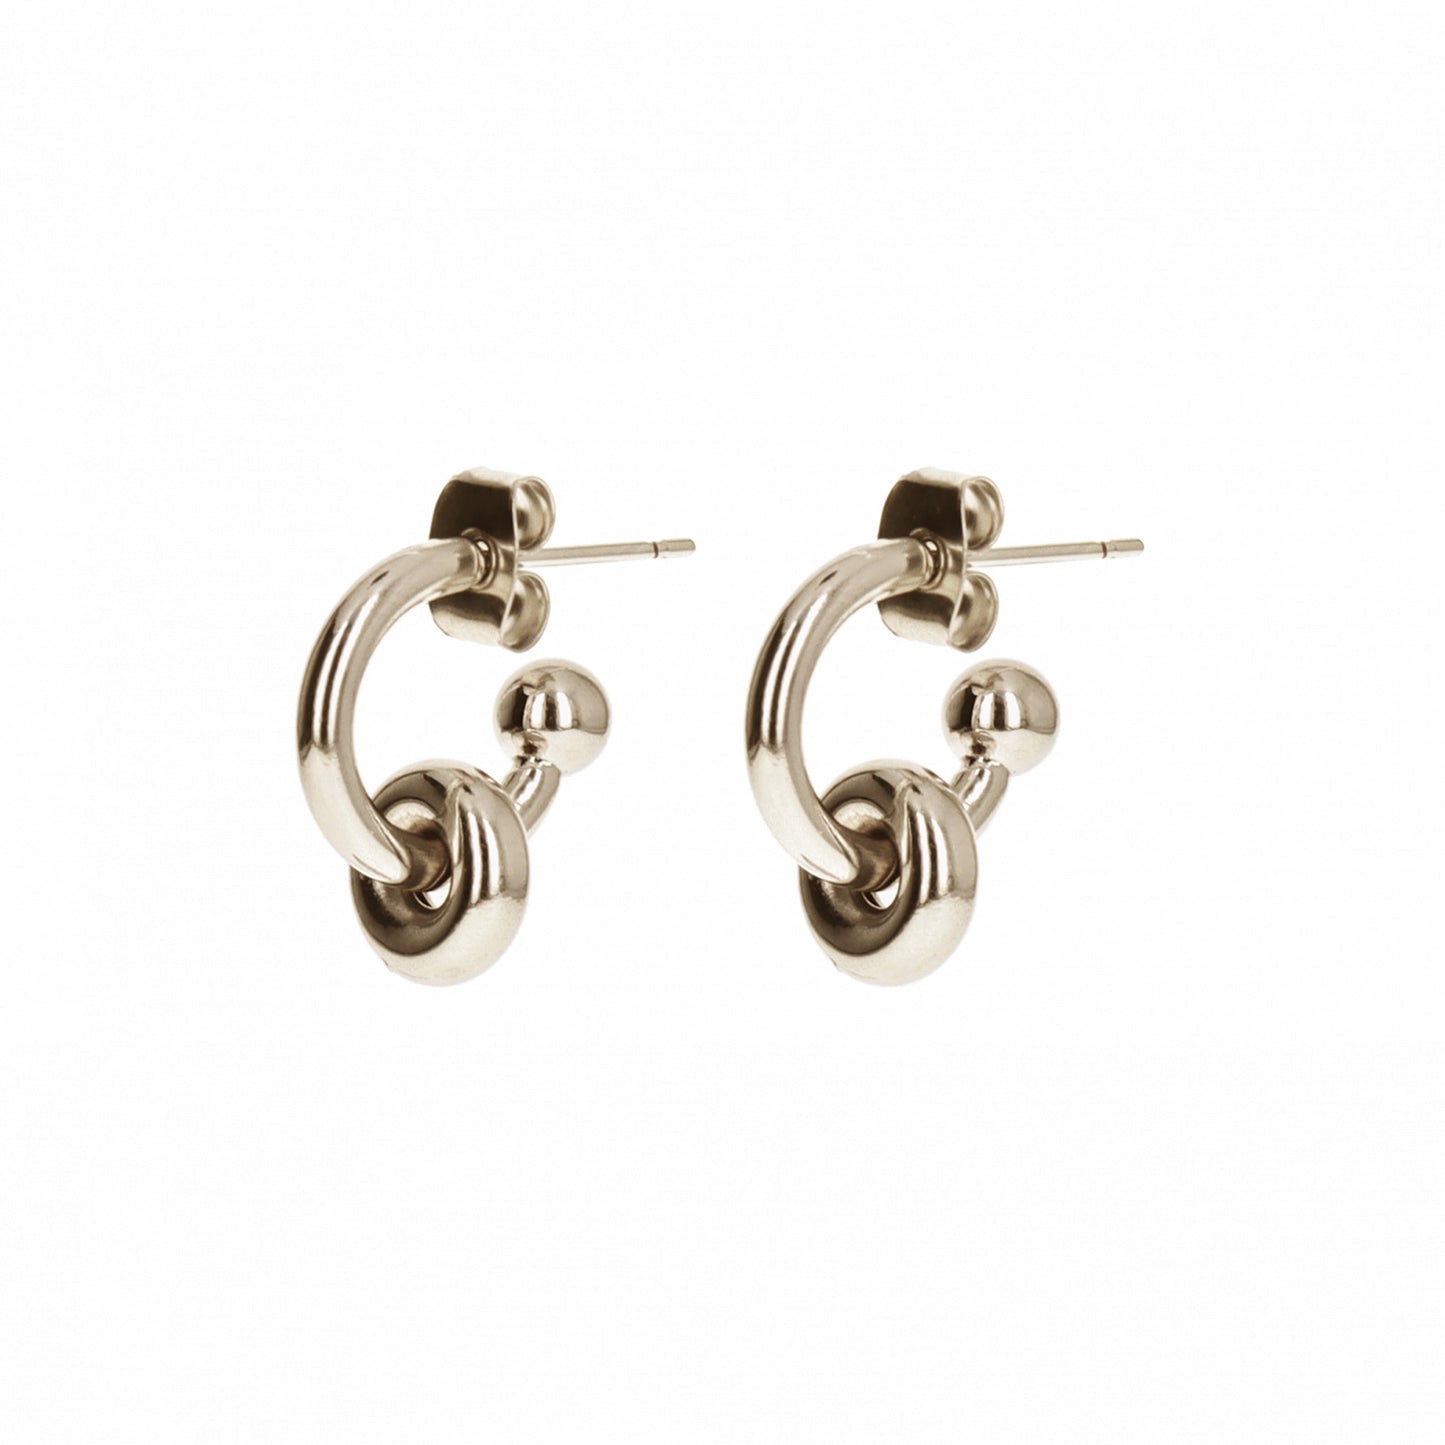 Justine Clenquet Ethan Earrings, Pale Gold